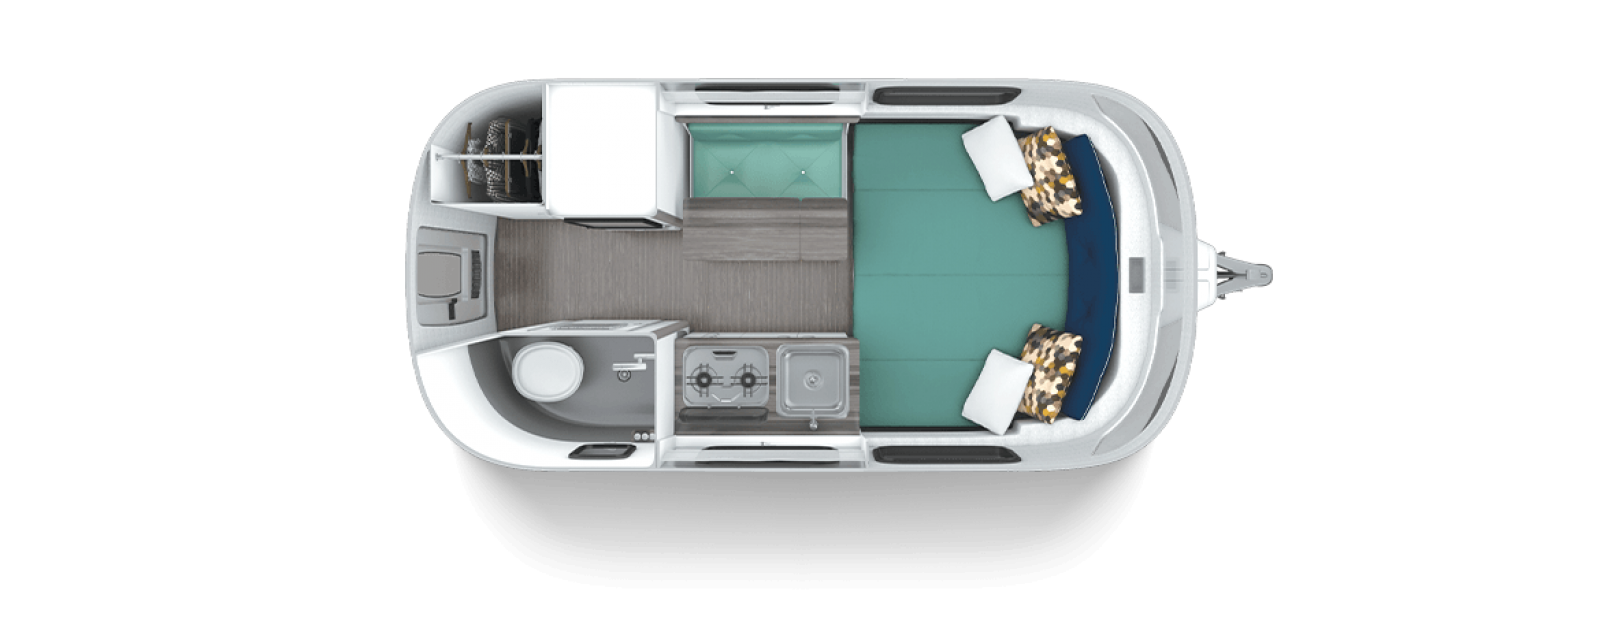 Nest by Airstream front bed floor plan